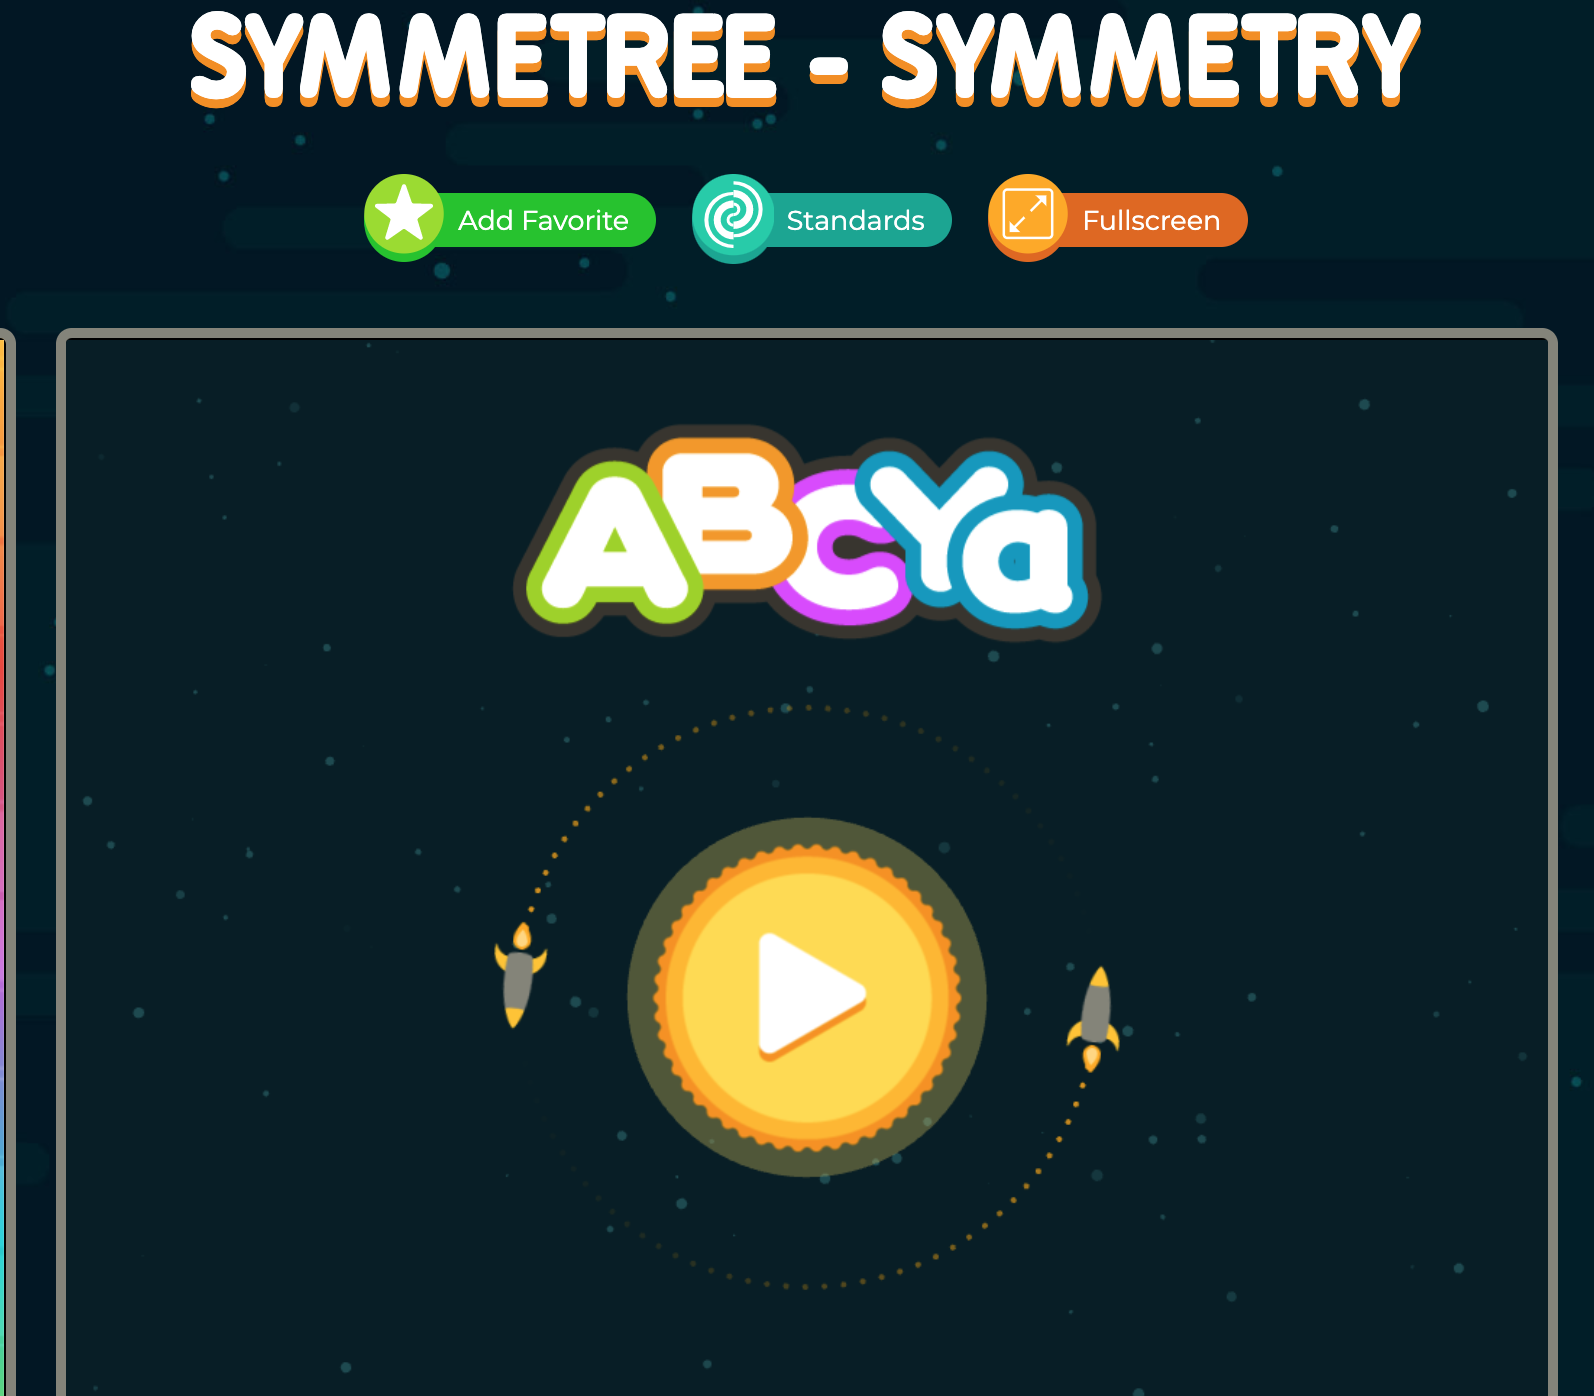 ABCya also offers printable games for your classroom